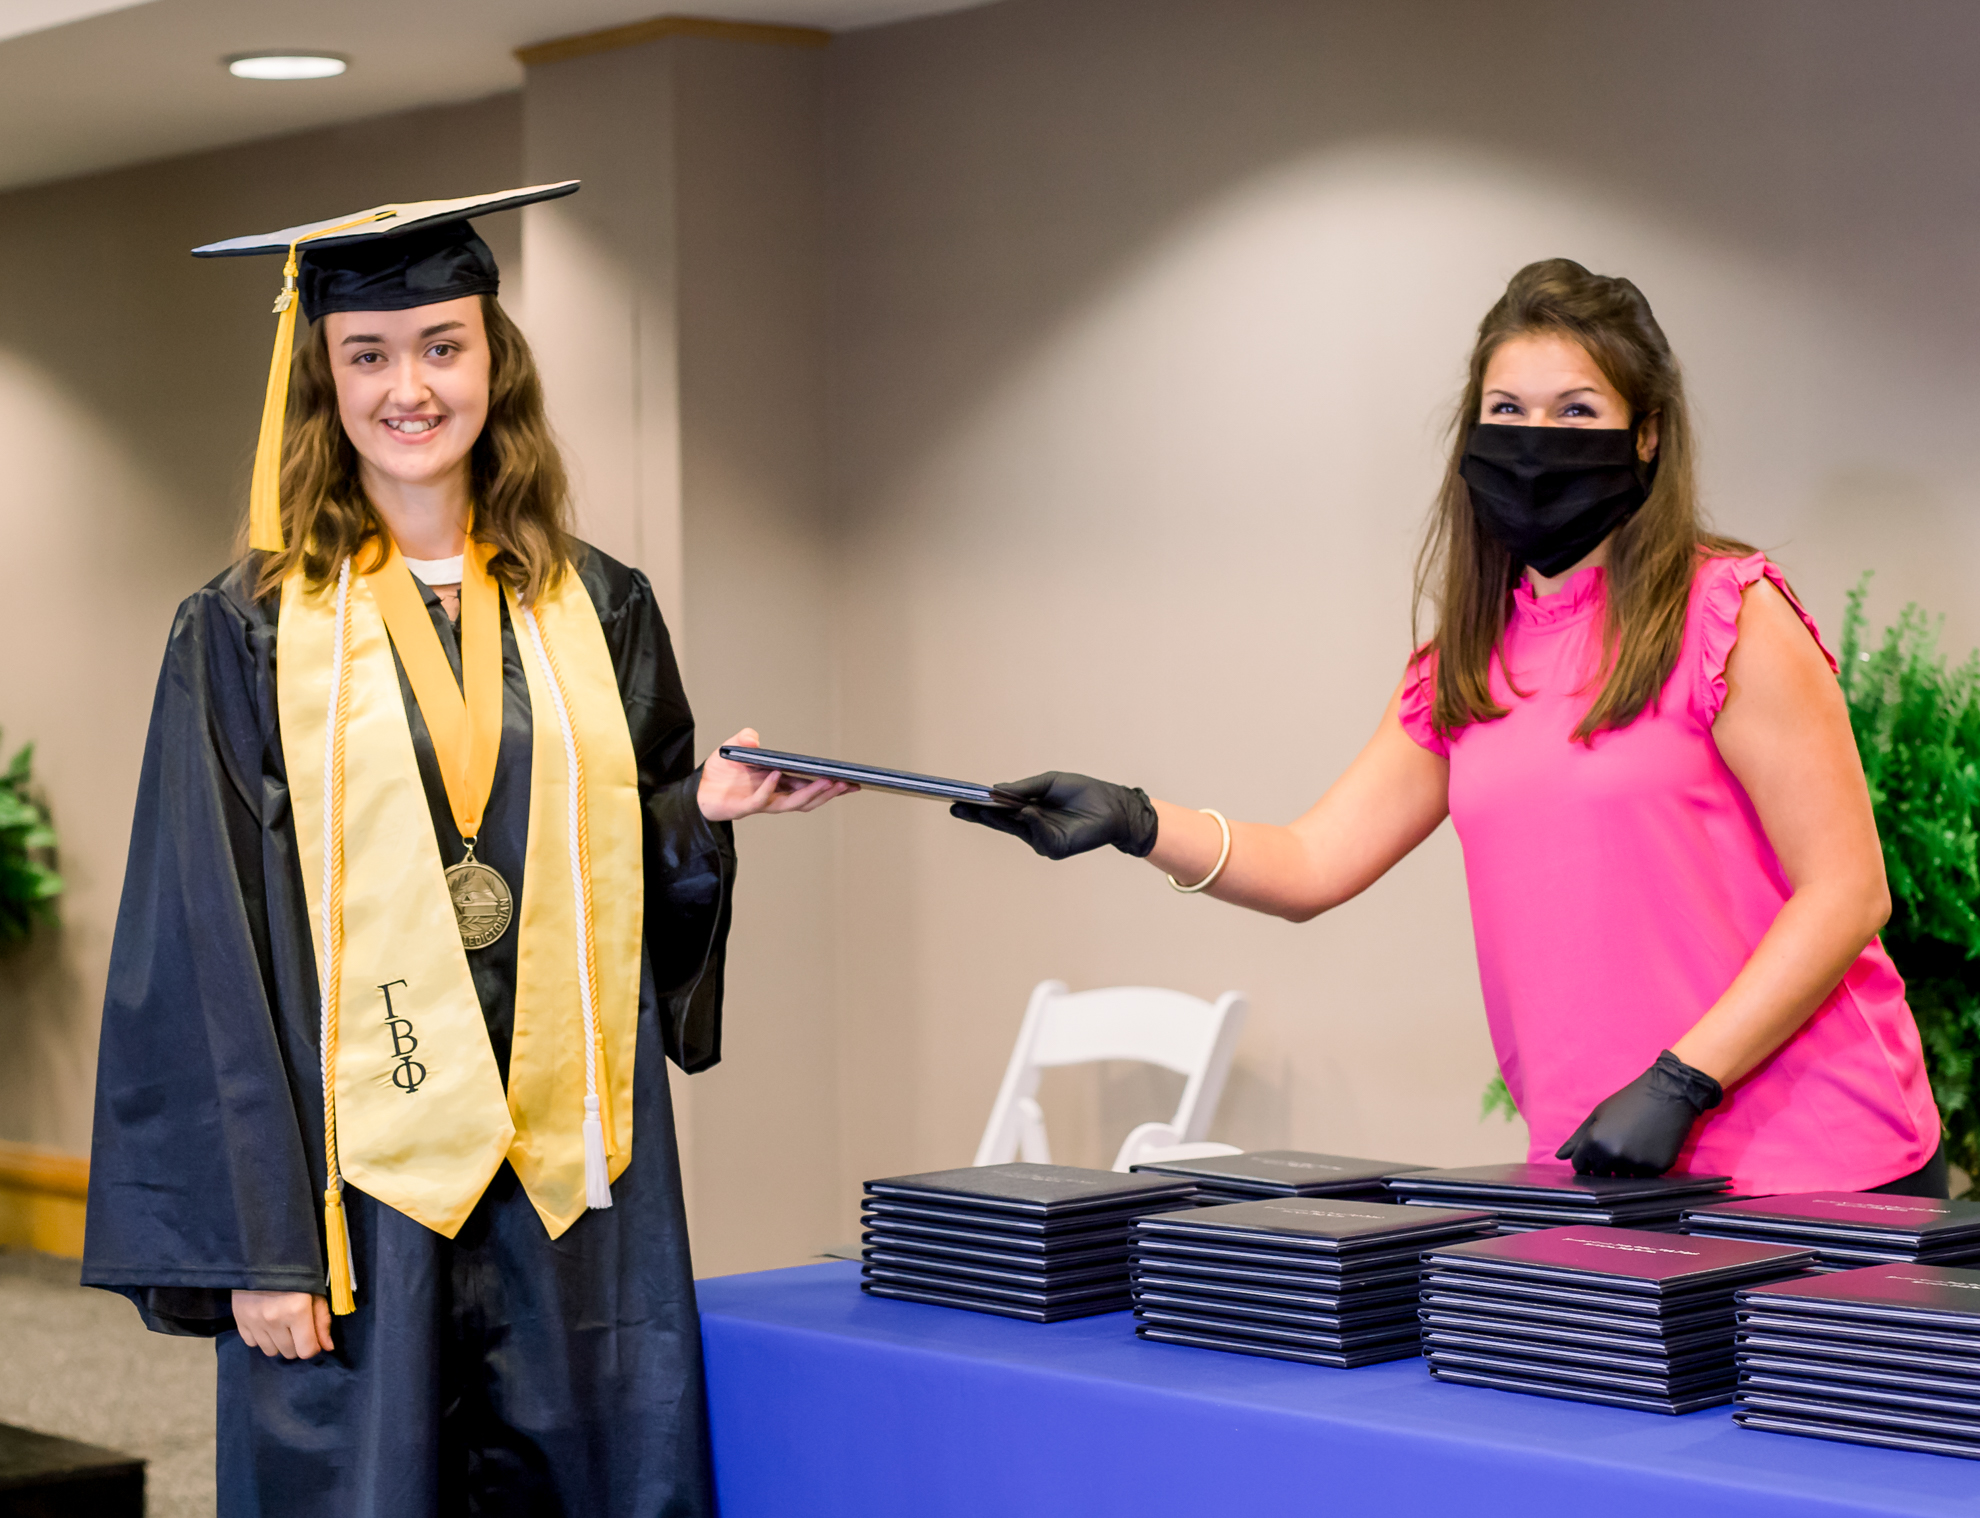 A person in graduation gear accepts a diploma